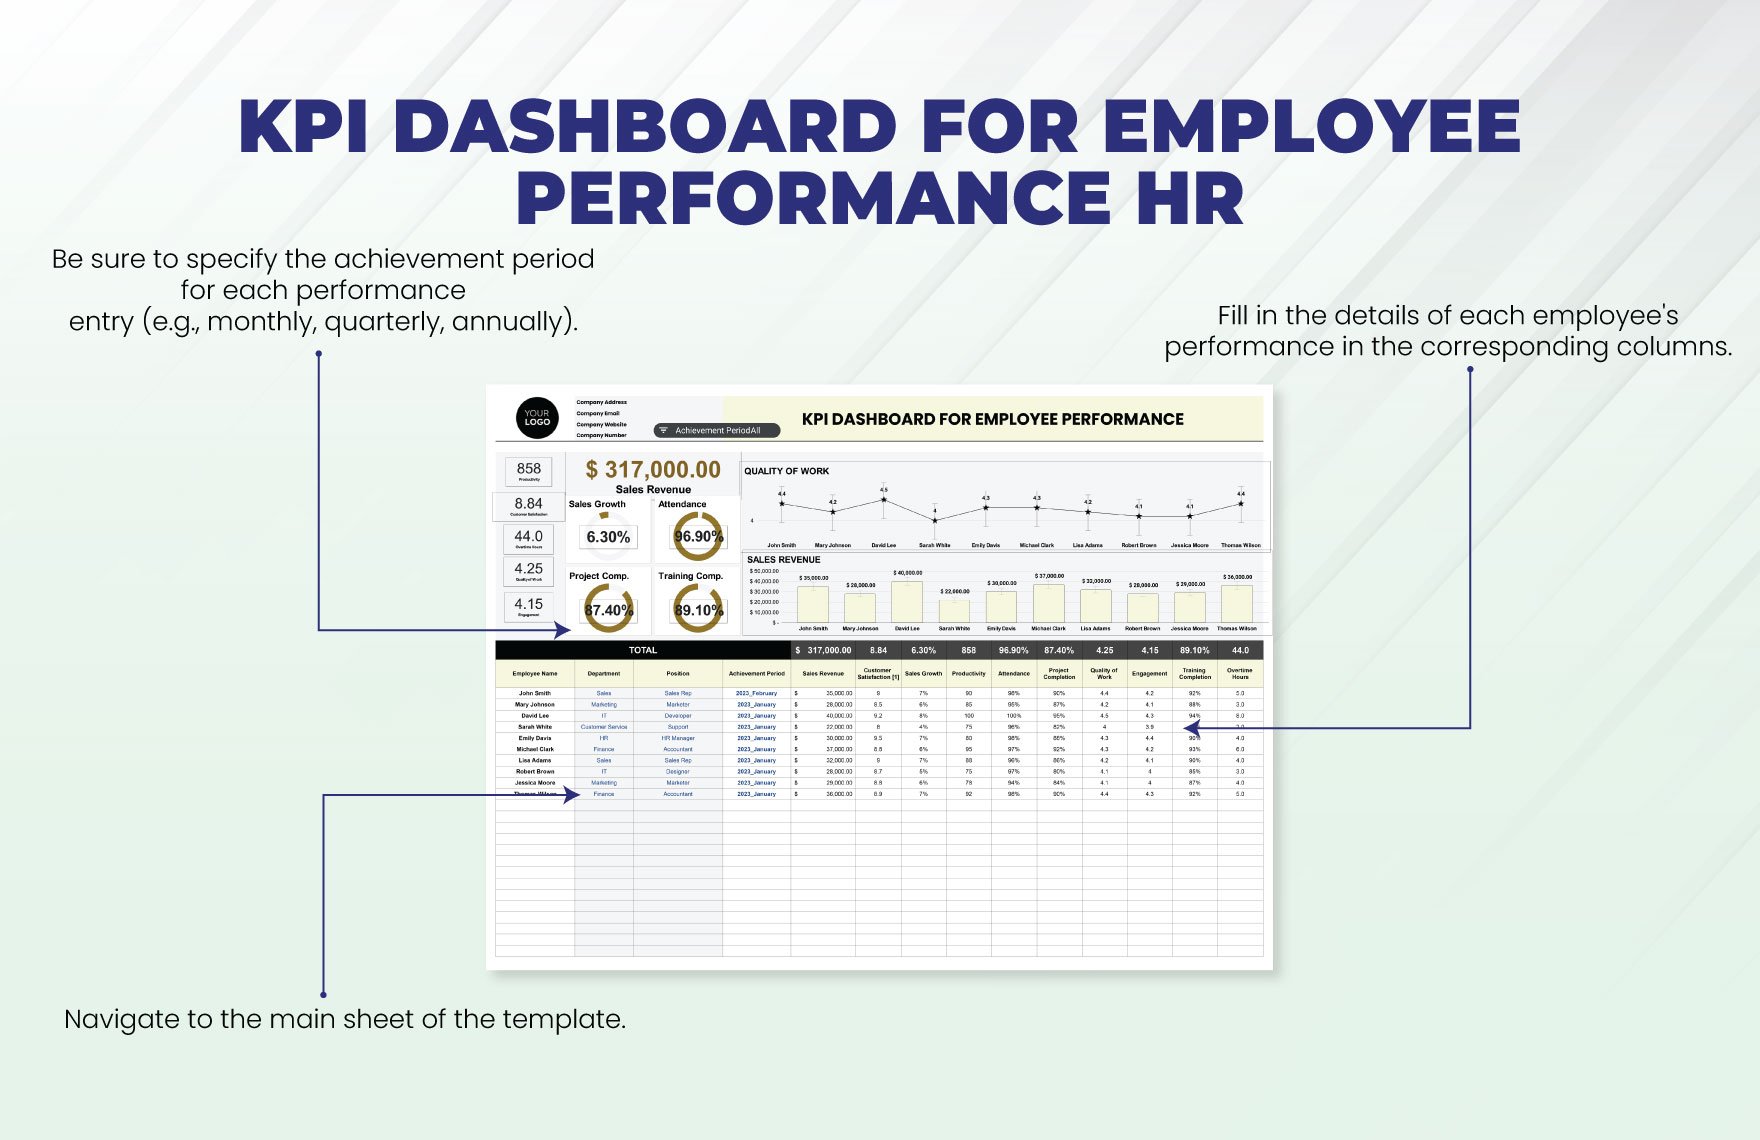 KPI Dashboard for Employee Performance HR Template